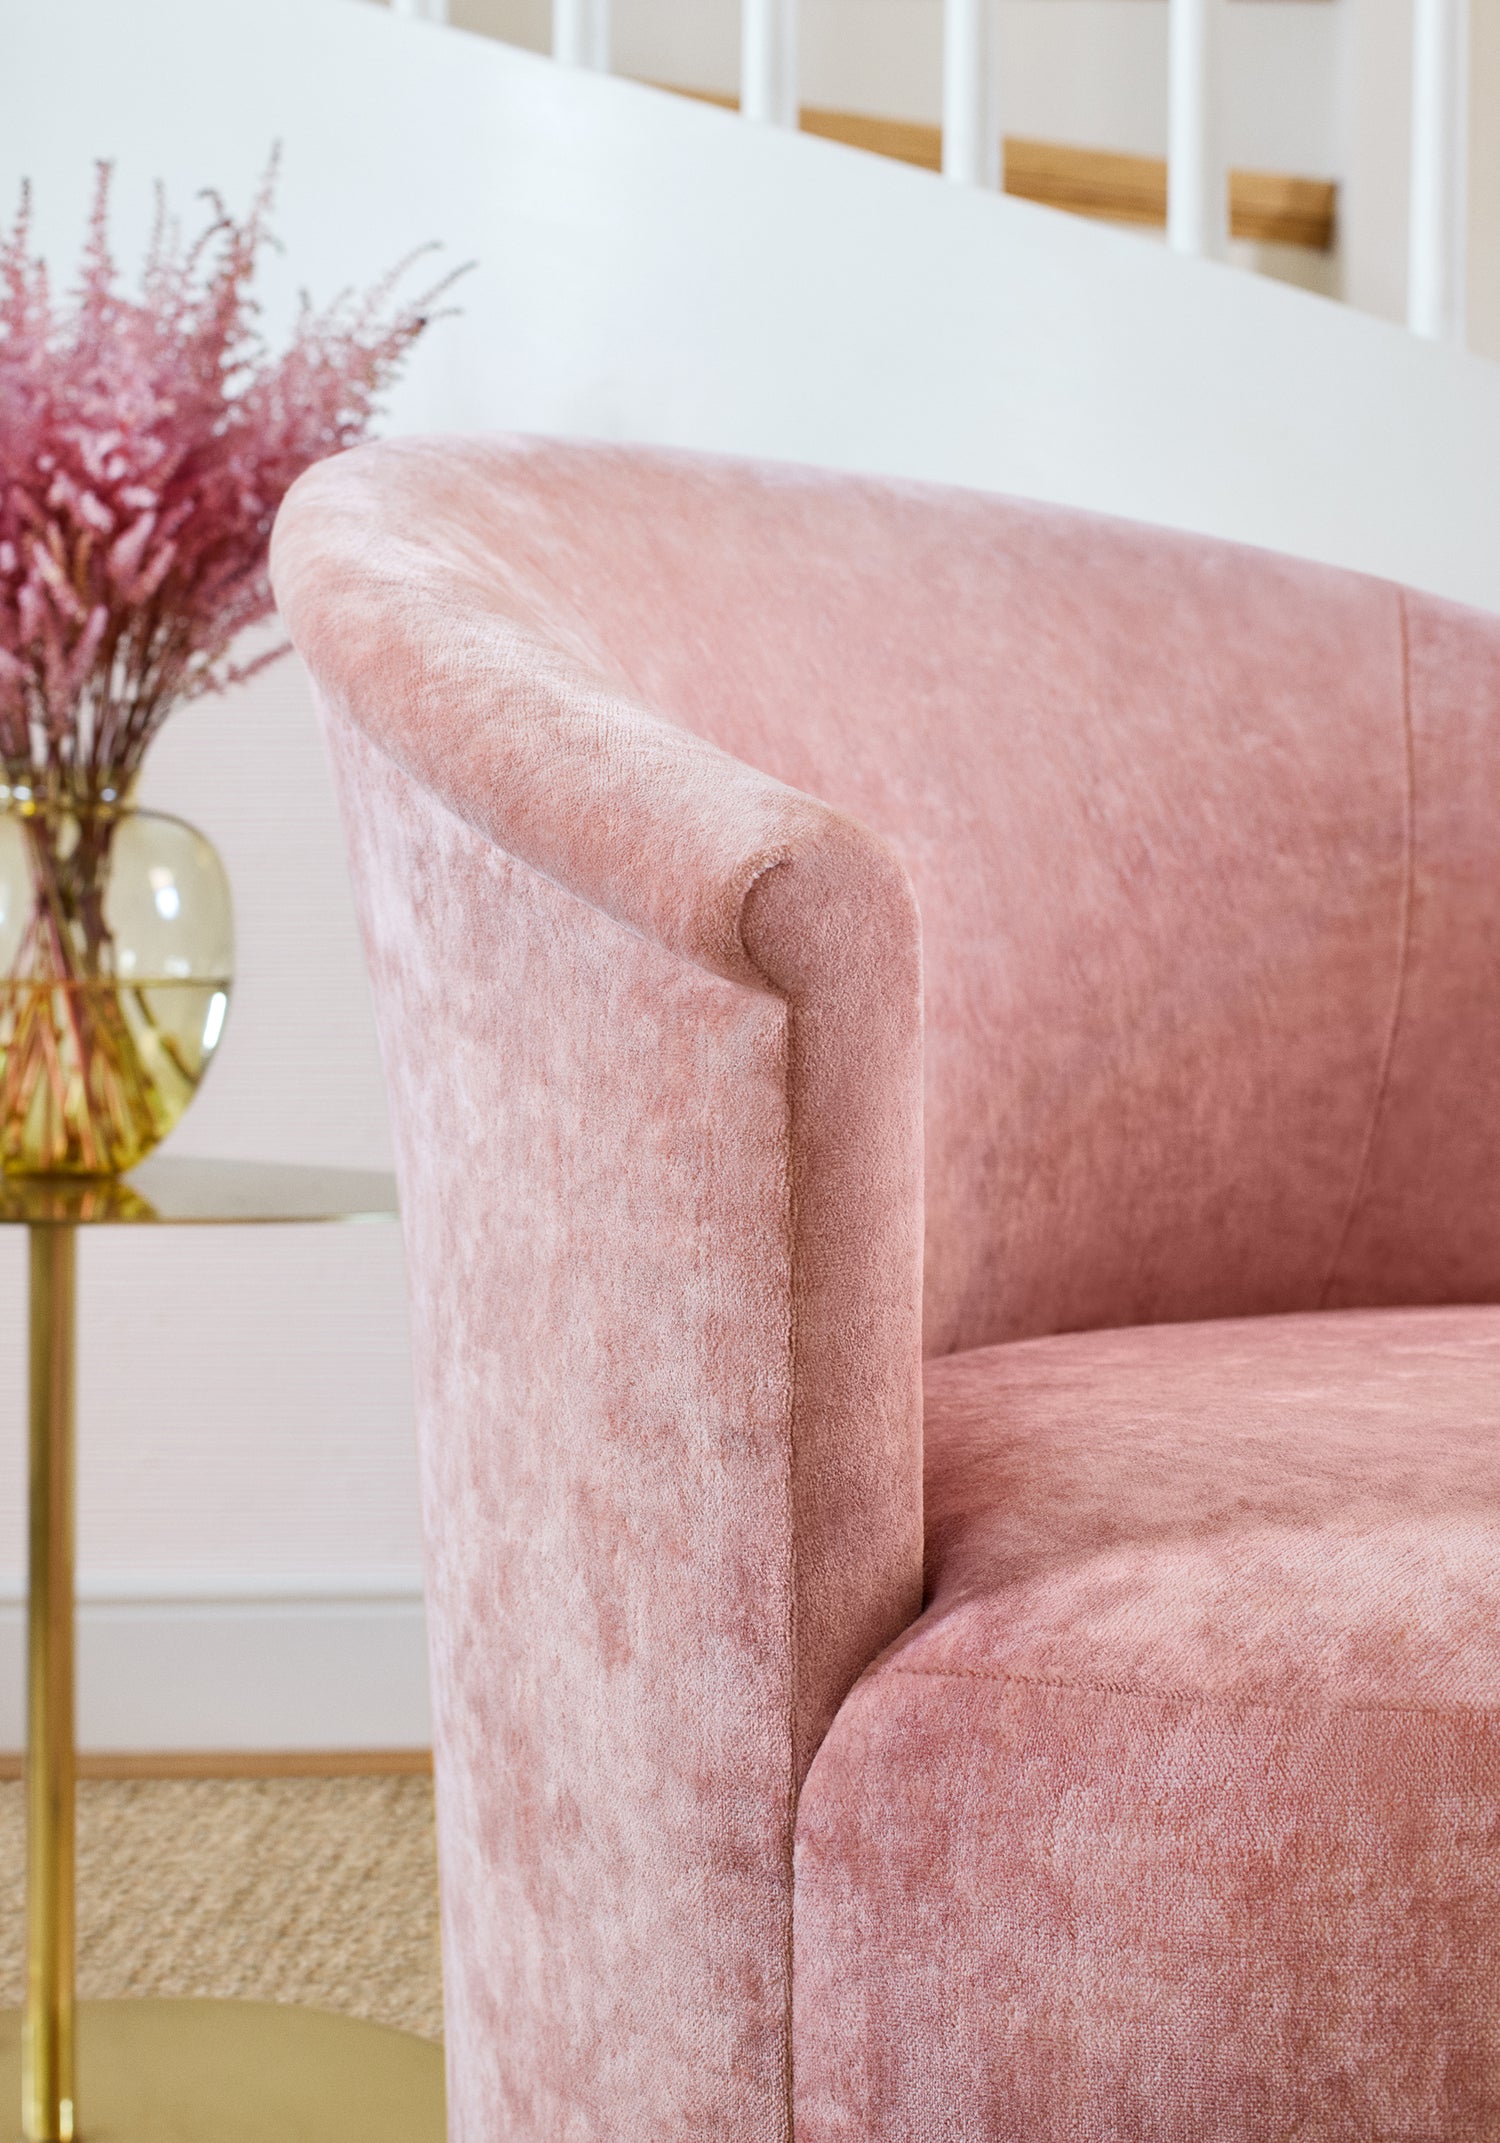 Side chair upholstered in Chair upholstered Celeste Velvet fabric in blush color - pattern number W8969 - by Thibaut in the Lyra Velvets collection